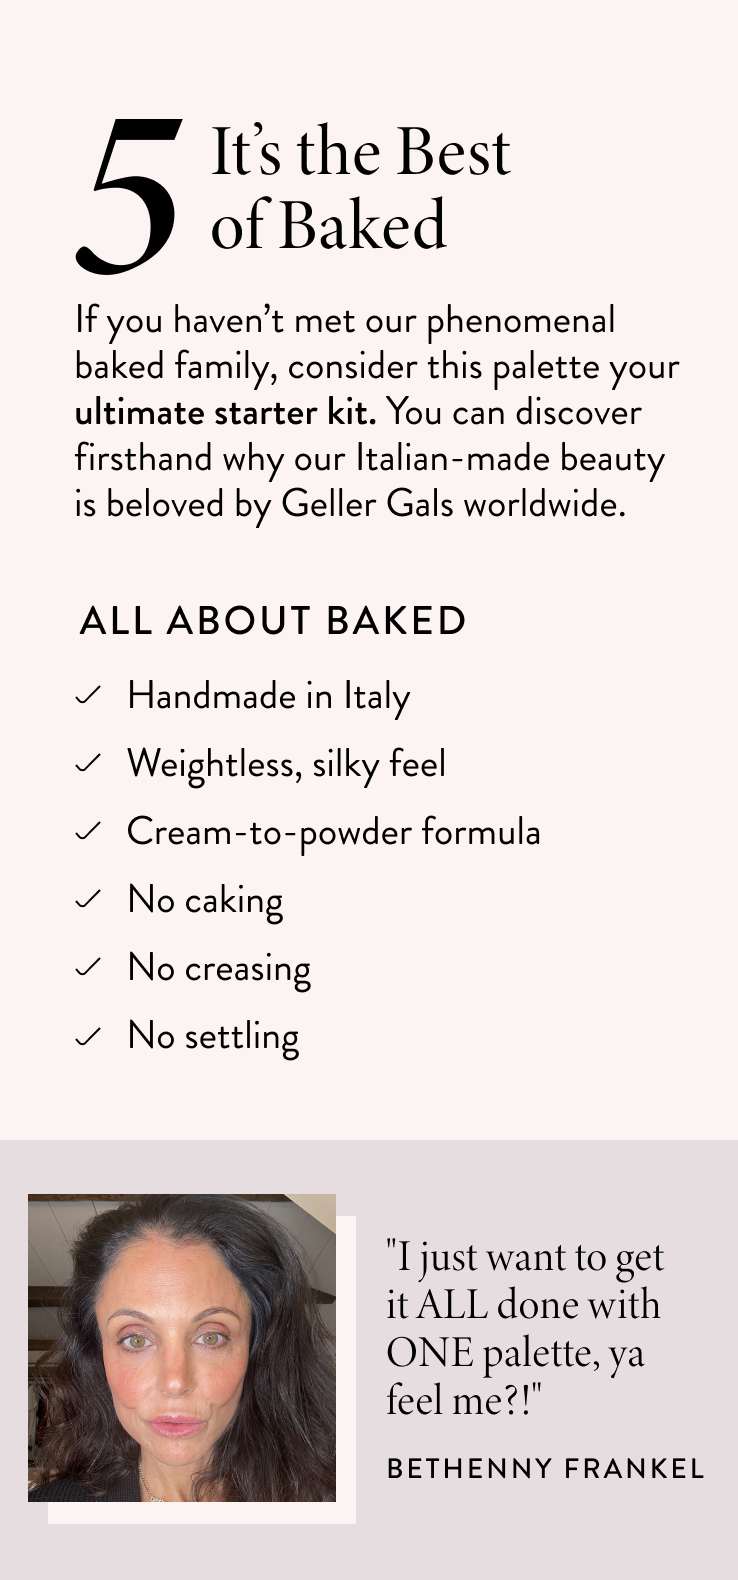 It’s the Best of Baked If you haven’t met our phenomenal baked family, consider this palette your ultimate starter kit. You can discover firsthand why our Italian-made beauty is beloved by Geller Gals worldwide.